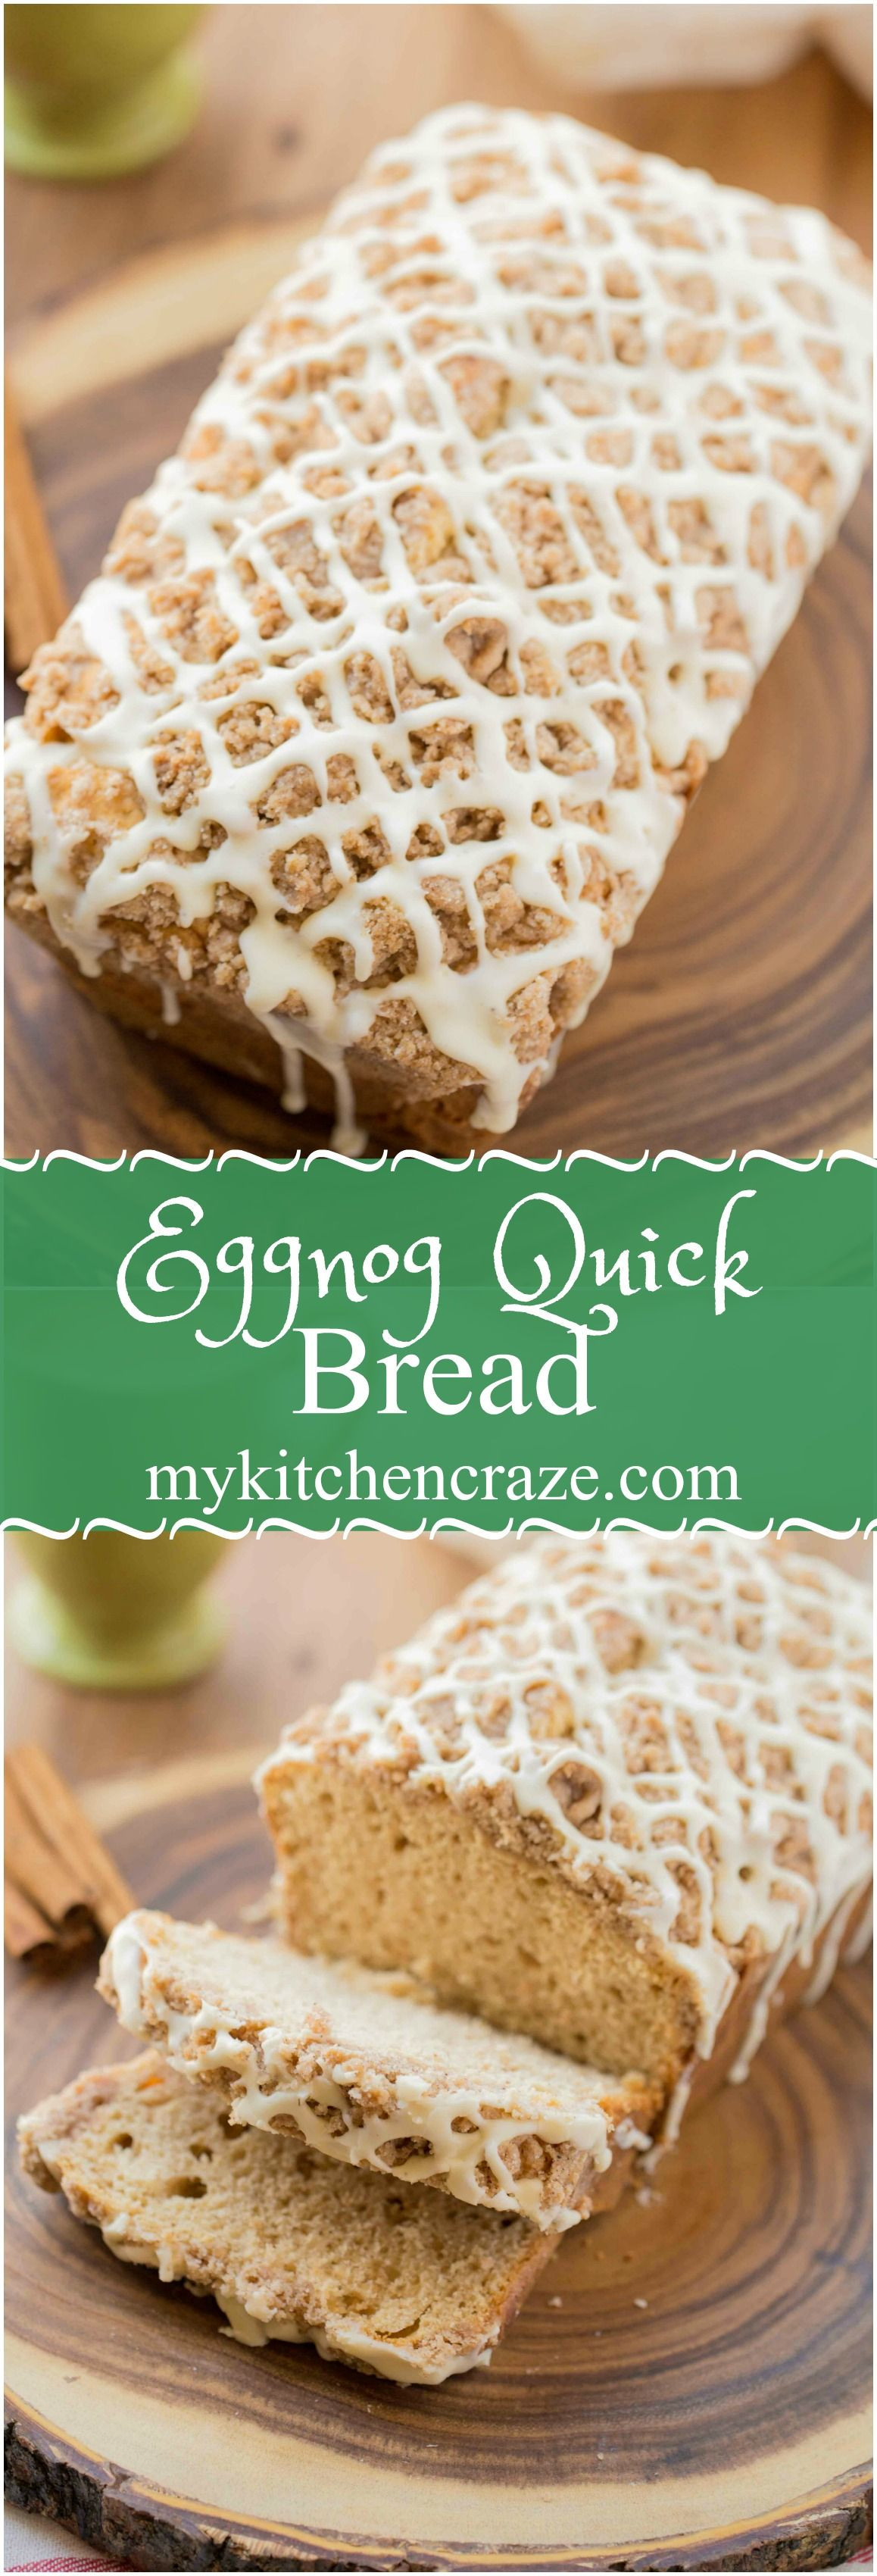 Christmas Quick Bread Recipe
 Eggnog Quick Bread should be on your holiday baking list